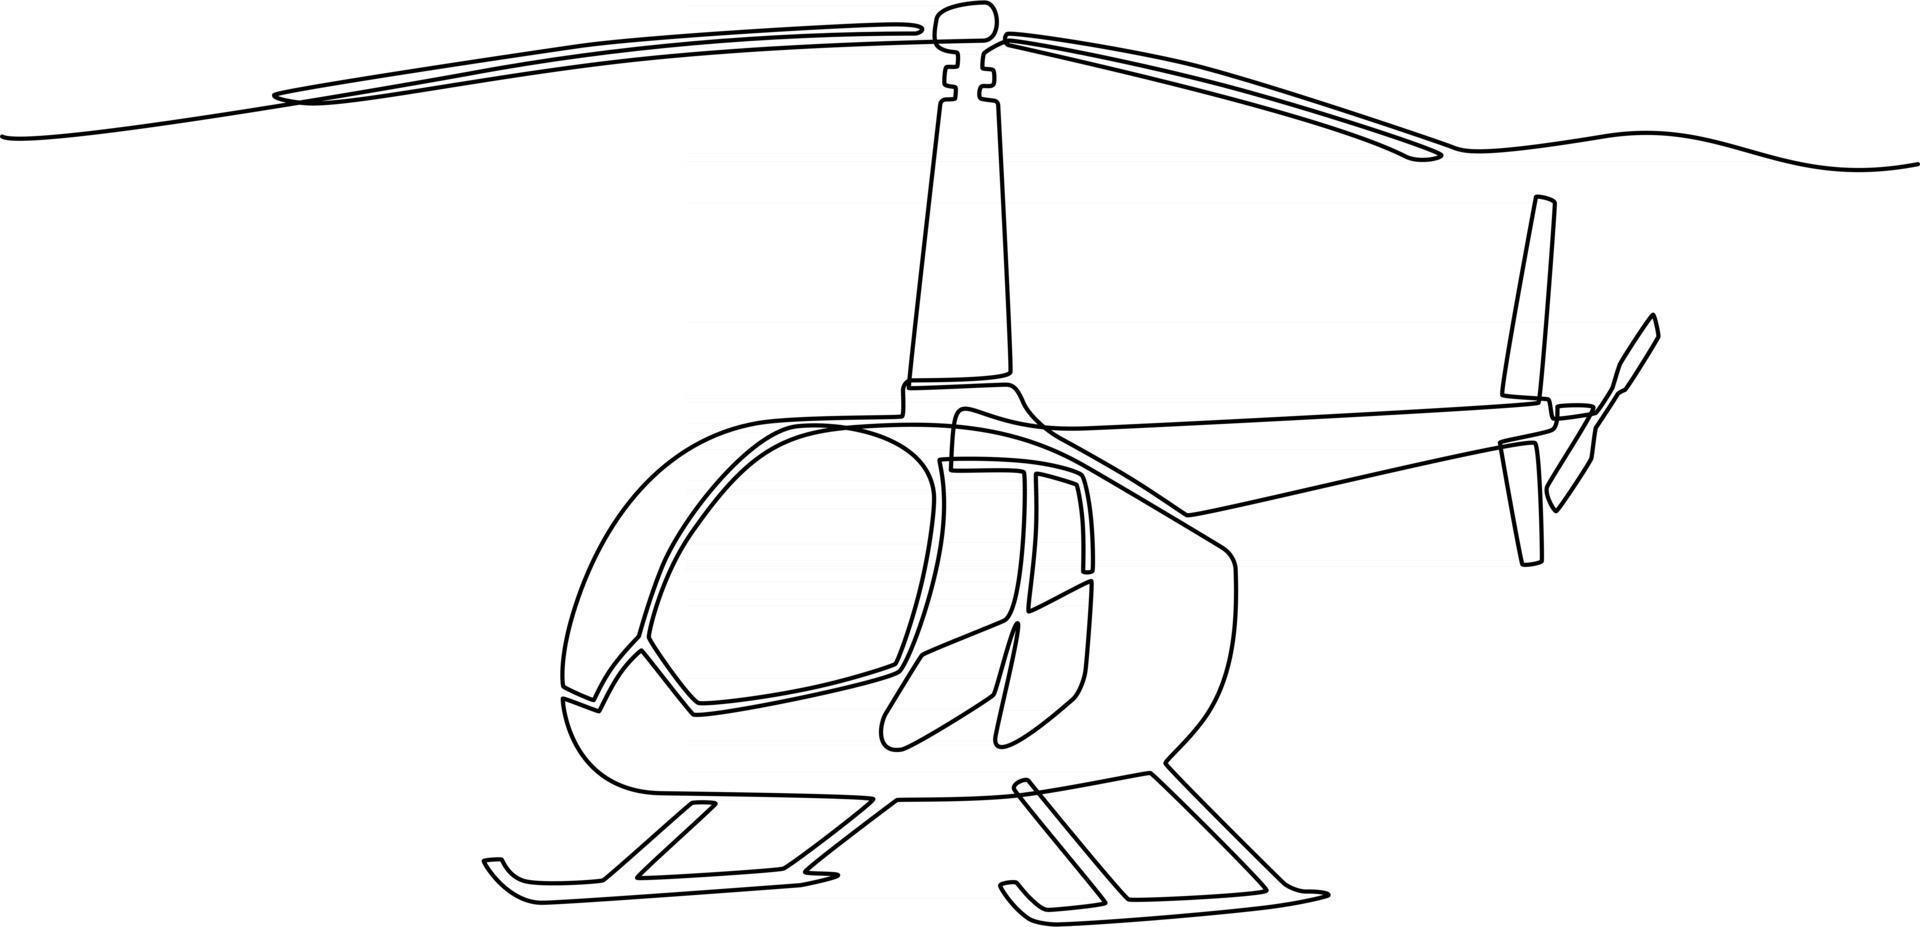 continuous line drawing helicopter vector illustration